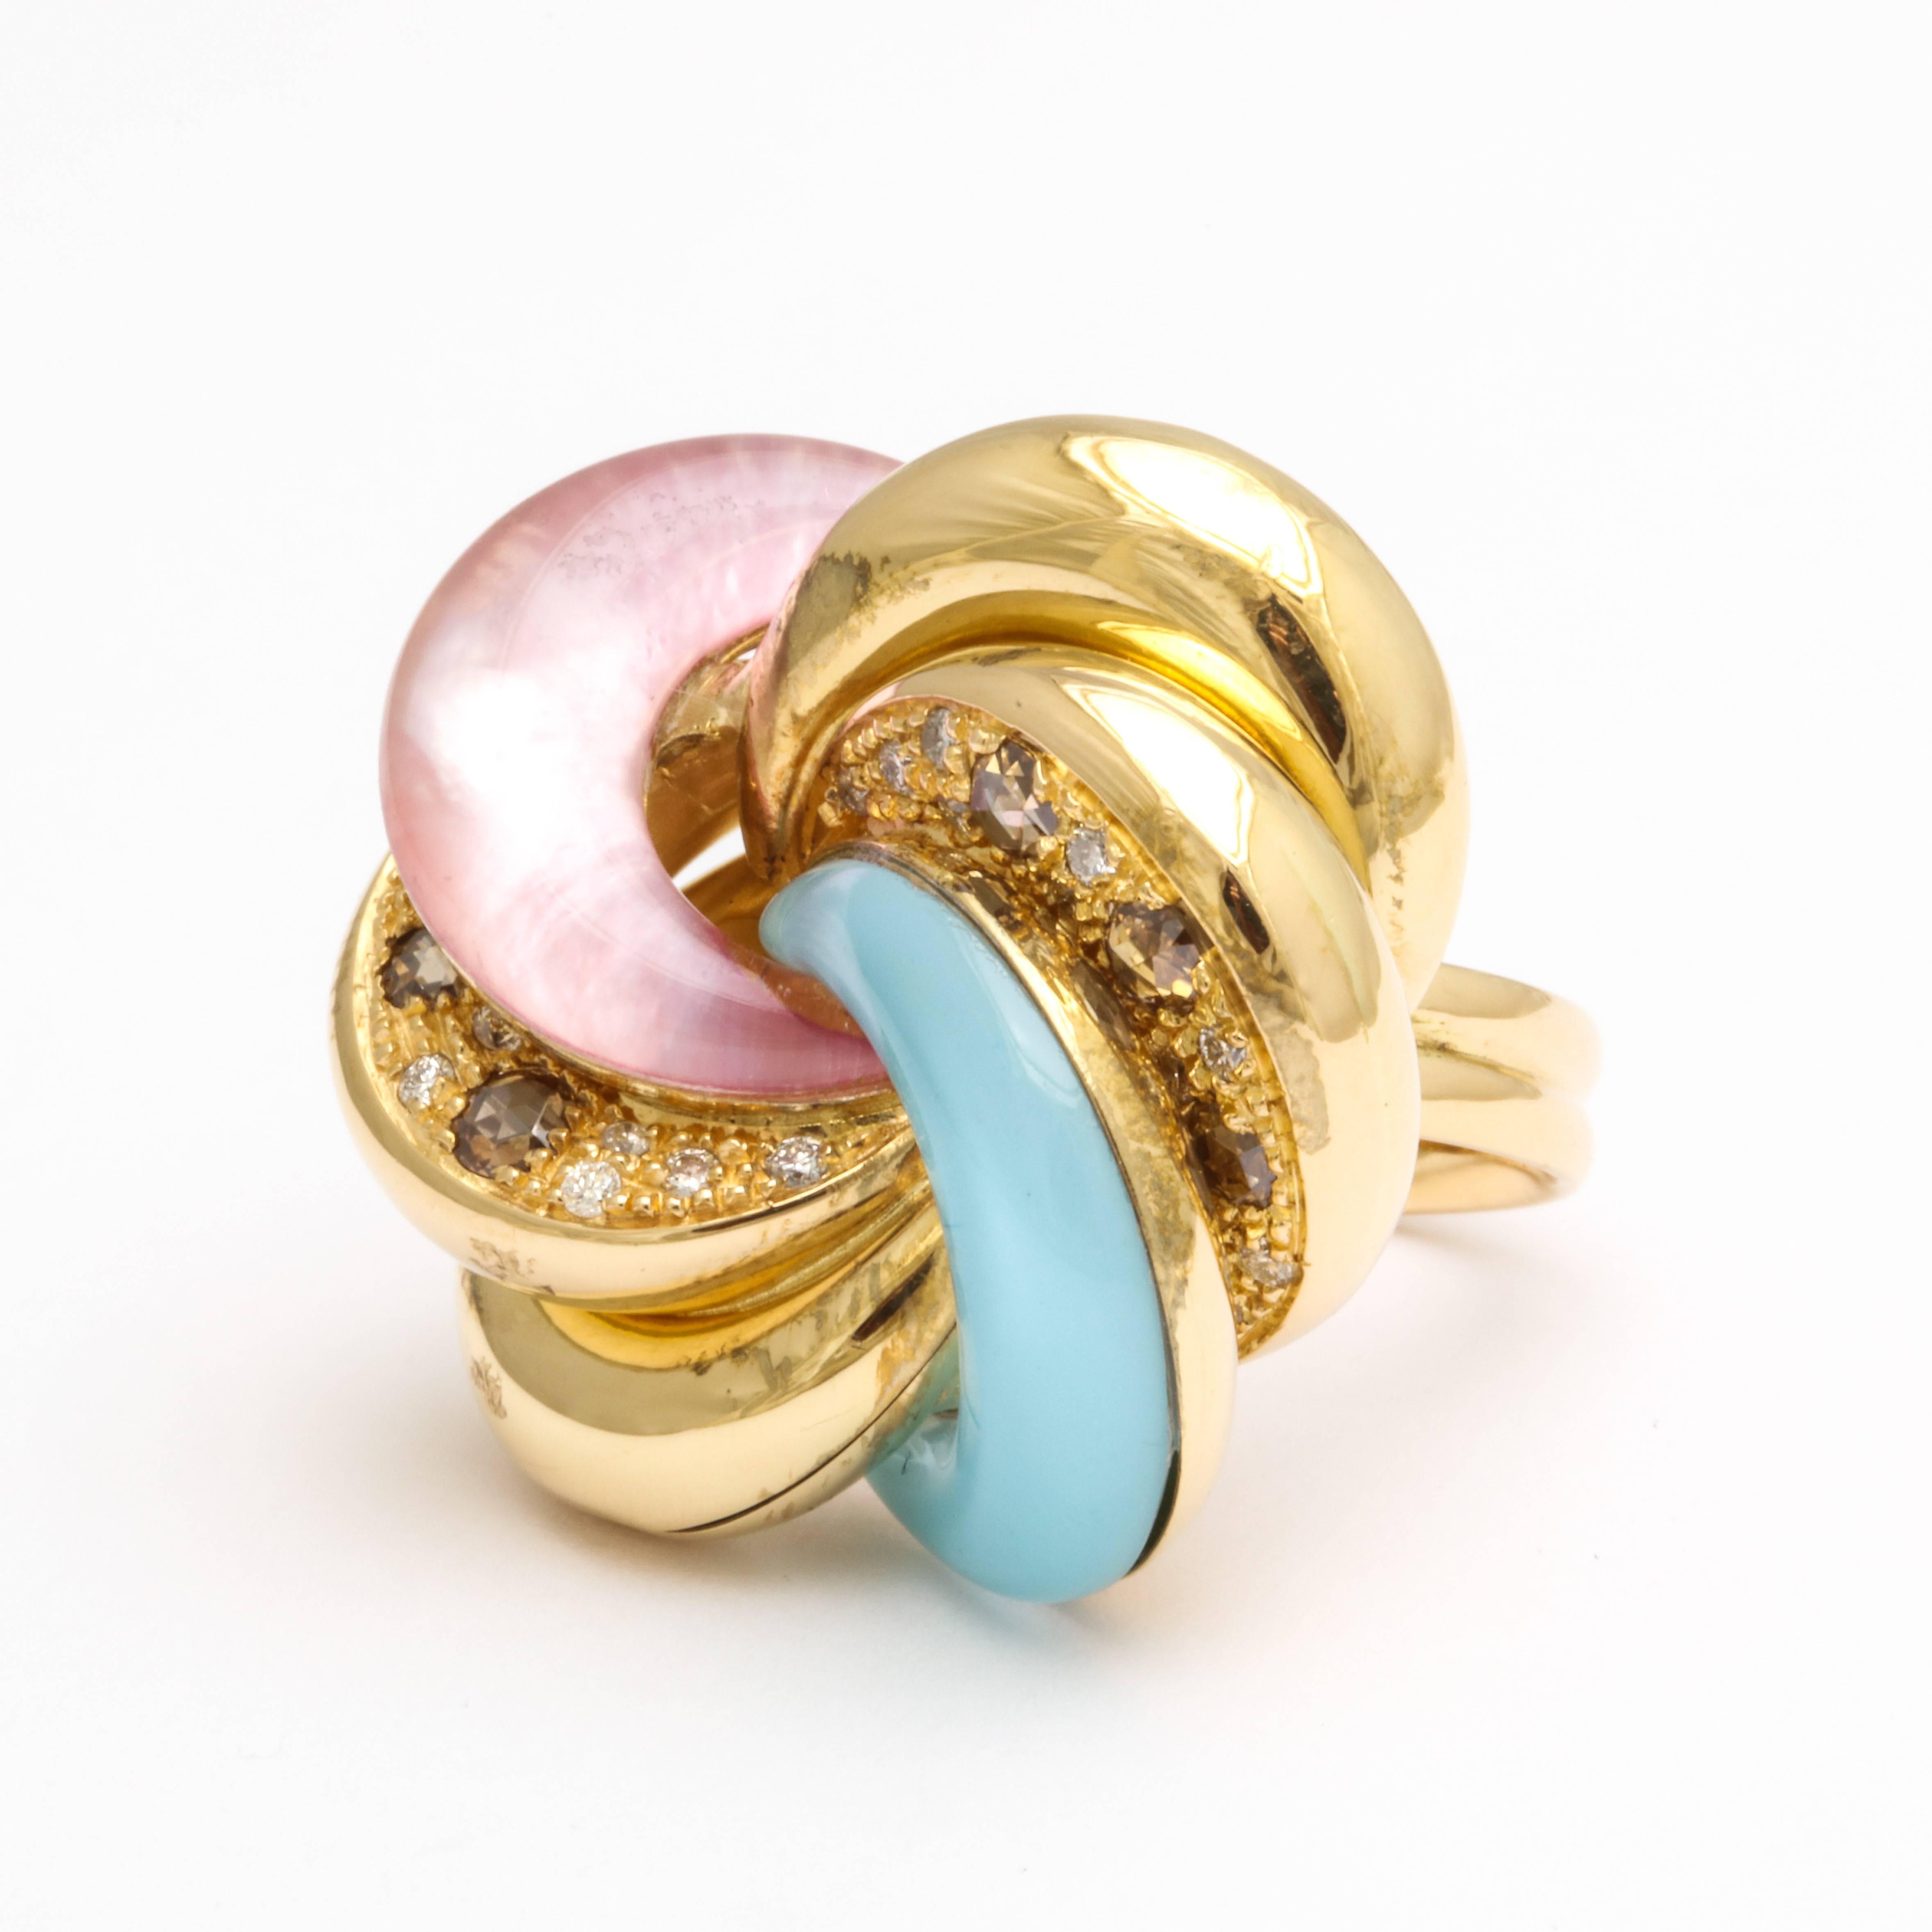 18k yellow gold, rose quartz and turquoise ring with rose cut and white diamonds.